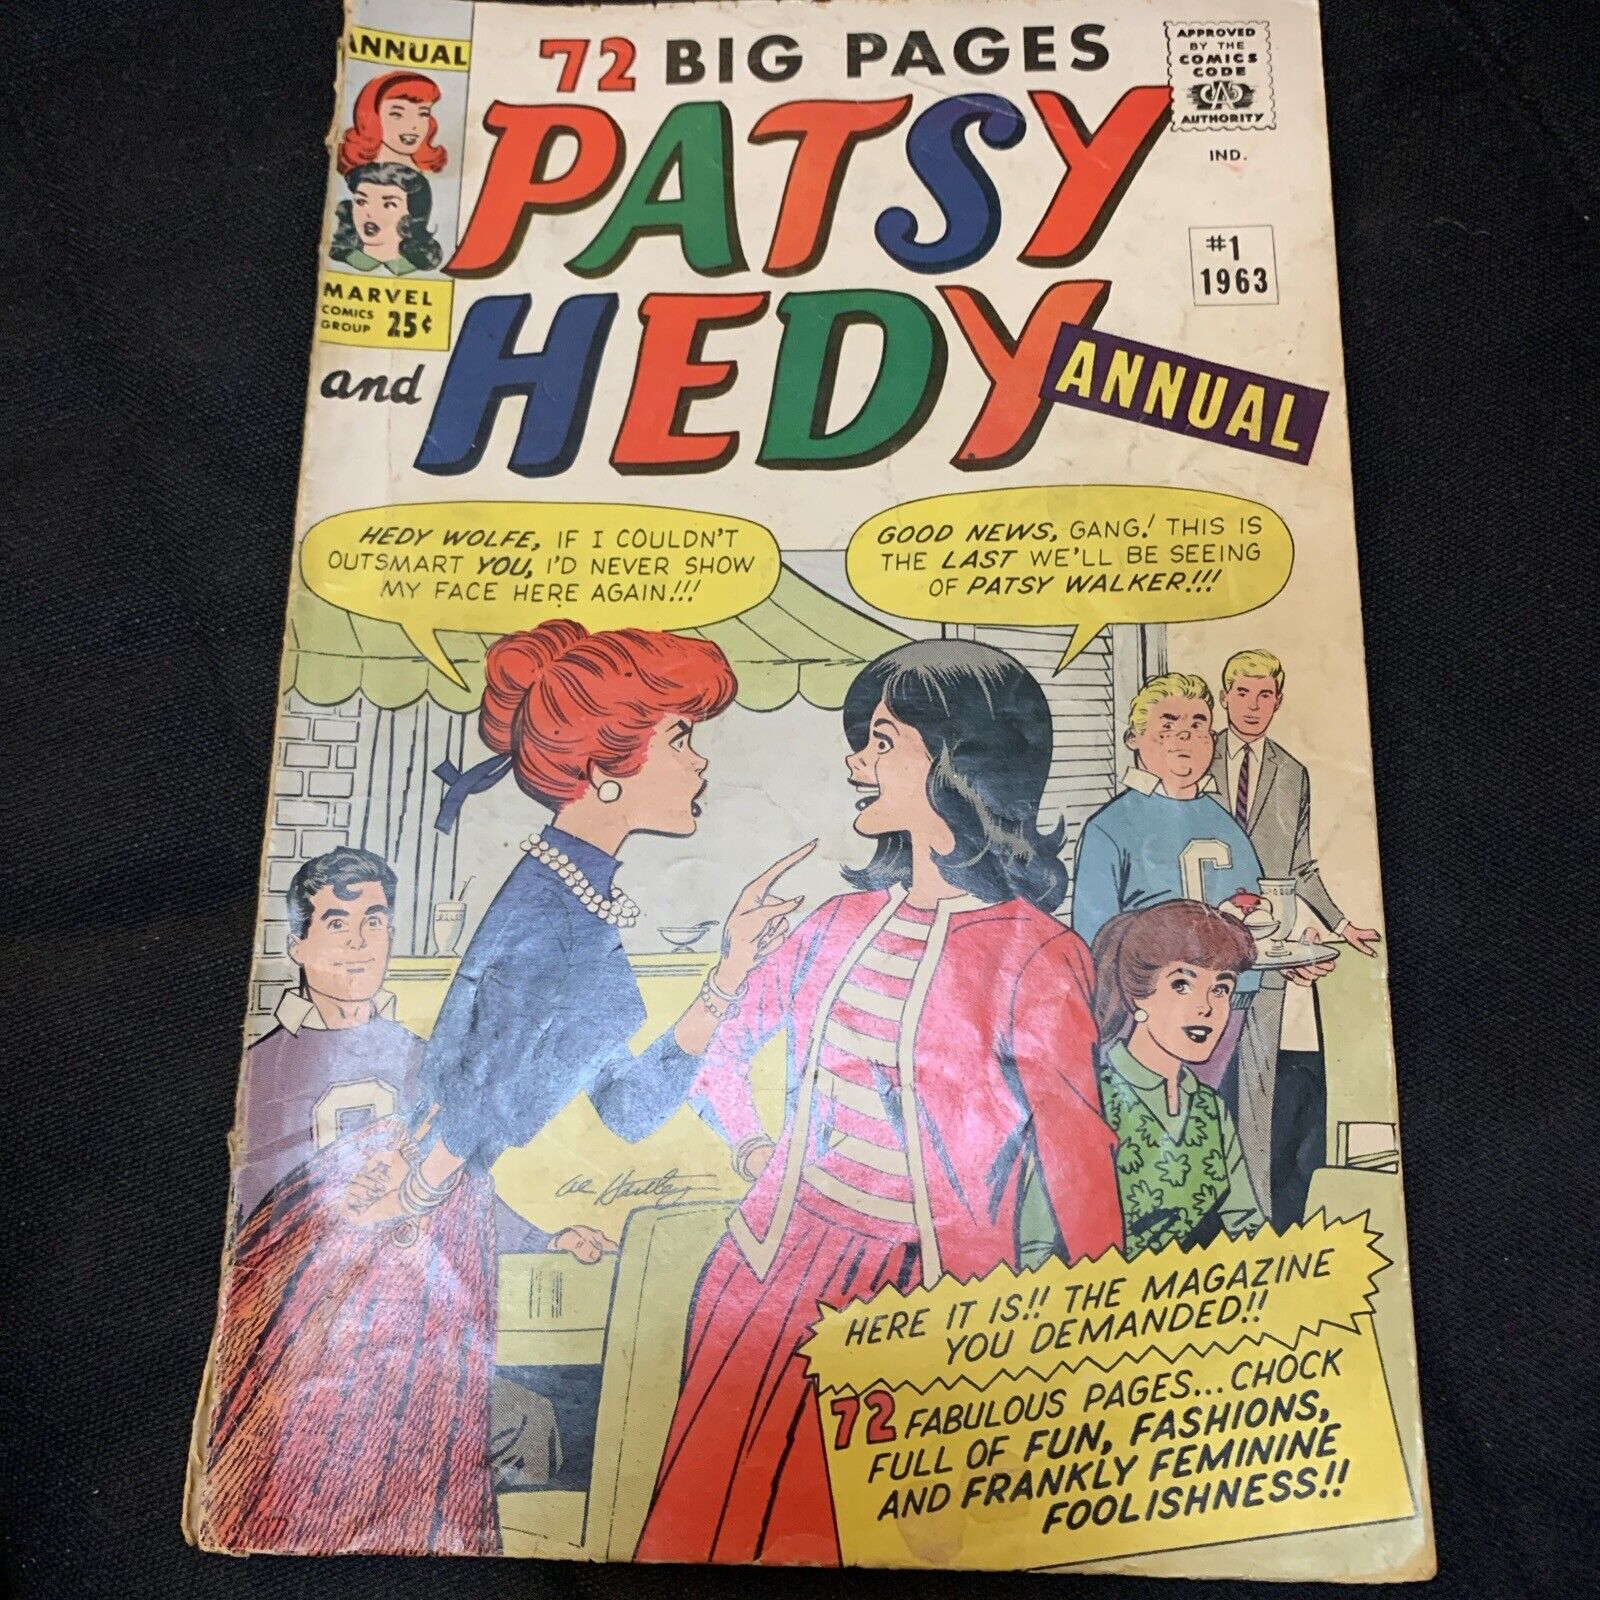 Patsy and Hedy Annual #1 (1963) Paper Dolls Marvel Comics Romance